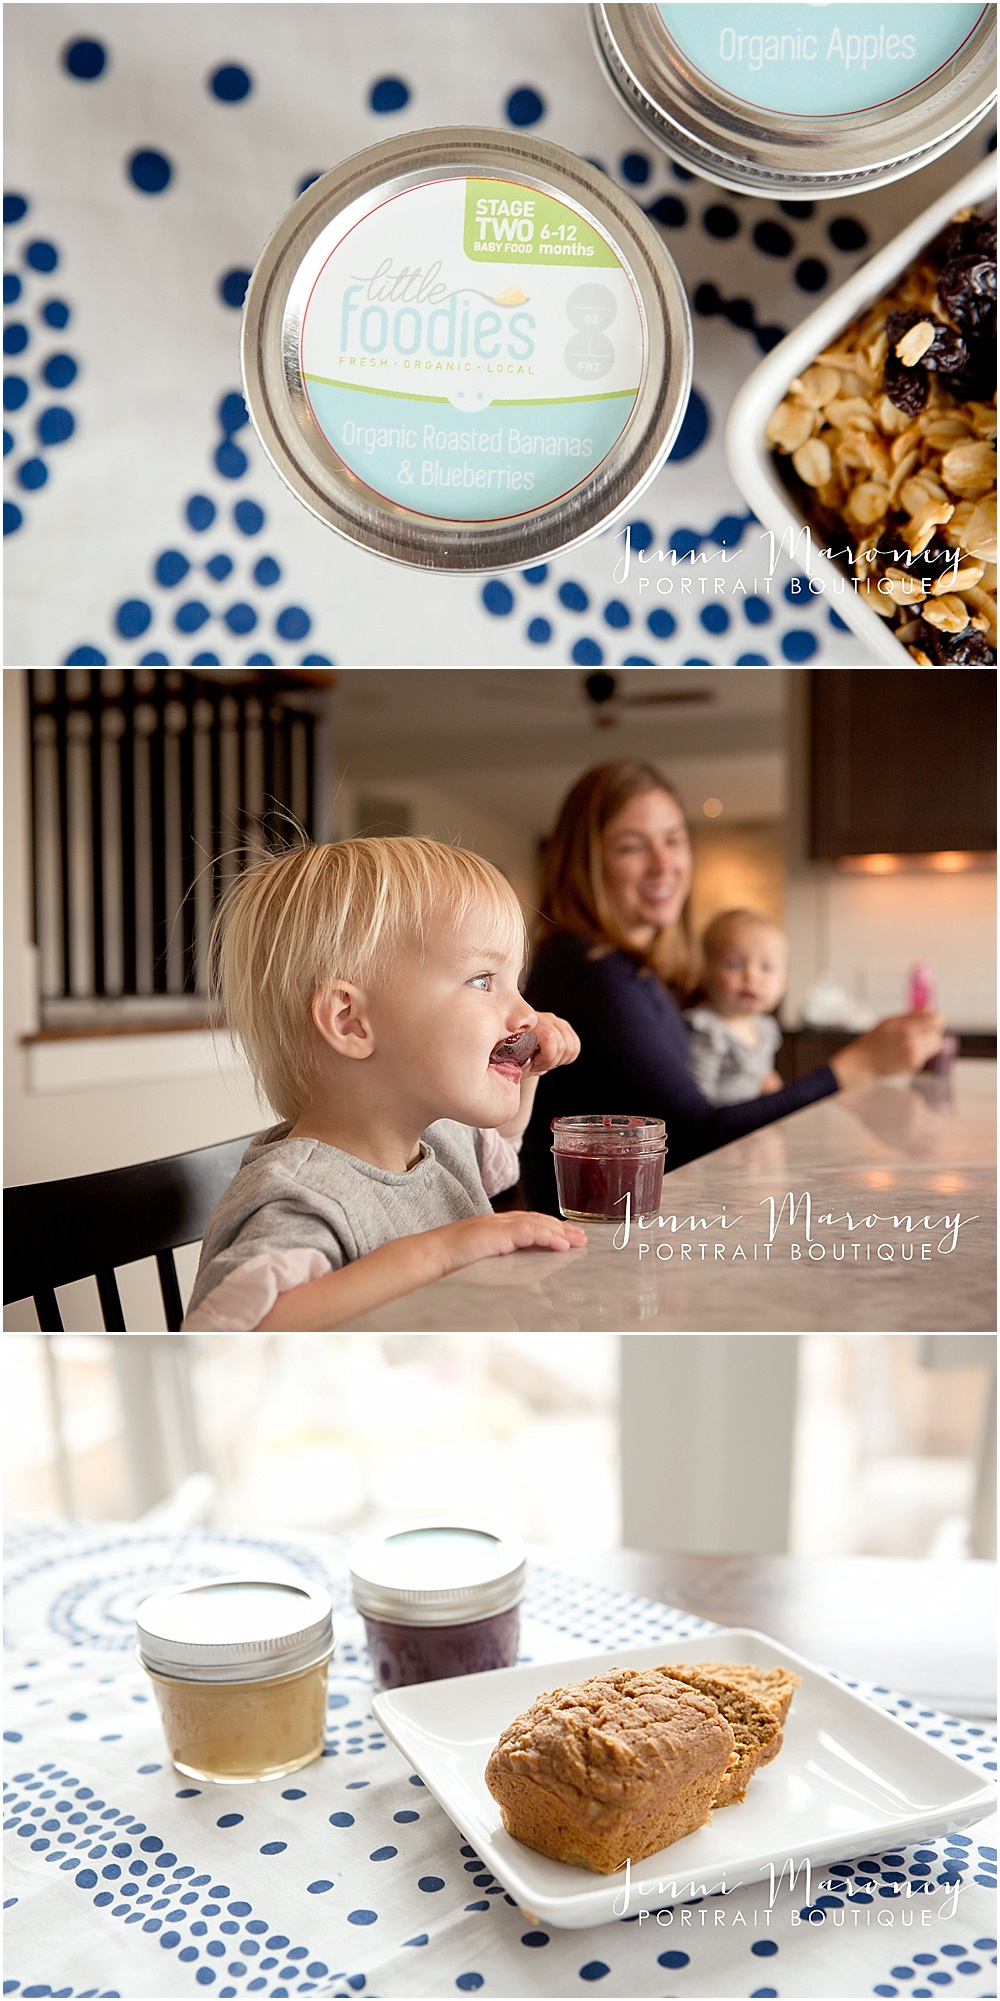 Boulder organic baby food photography shoot with Little Foodies and Jenni Maroney Portrait Boutique.